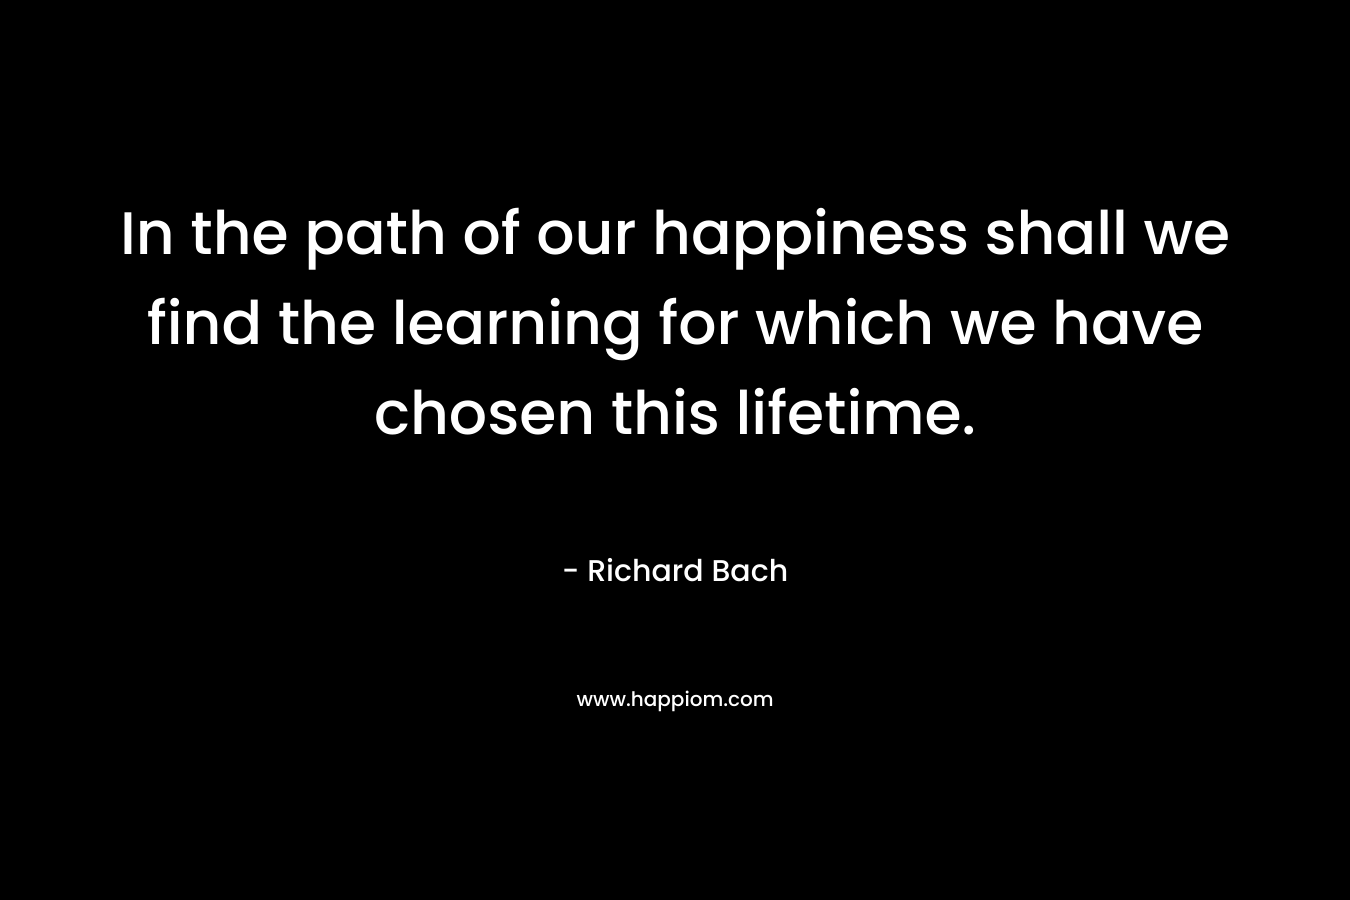 In the path of our happiness shall we find the learning for which we have chosen this lifetime. – Richard Bach